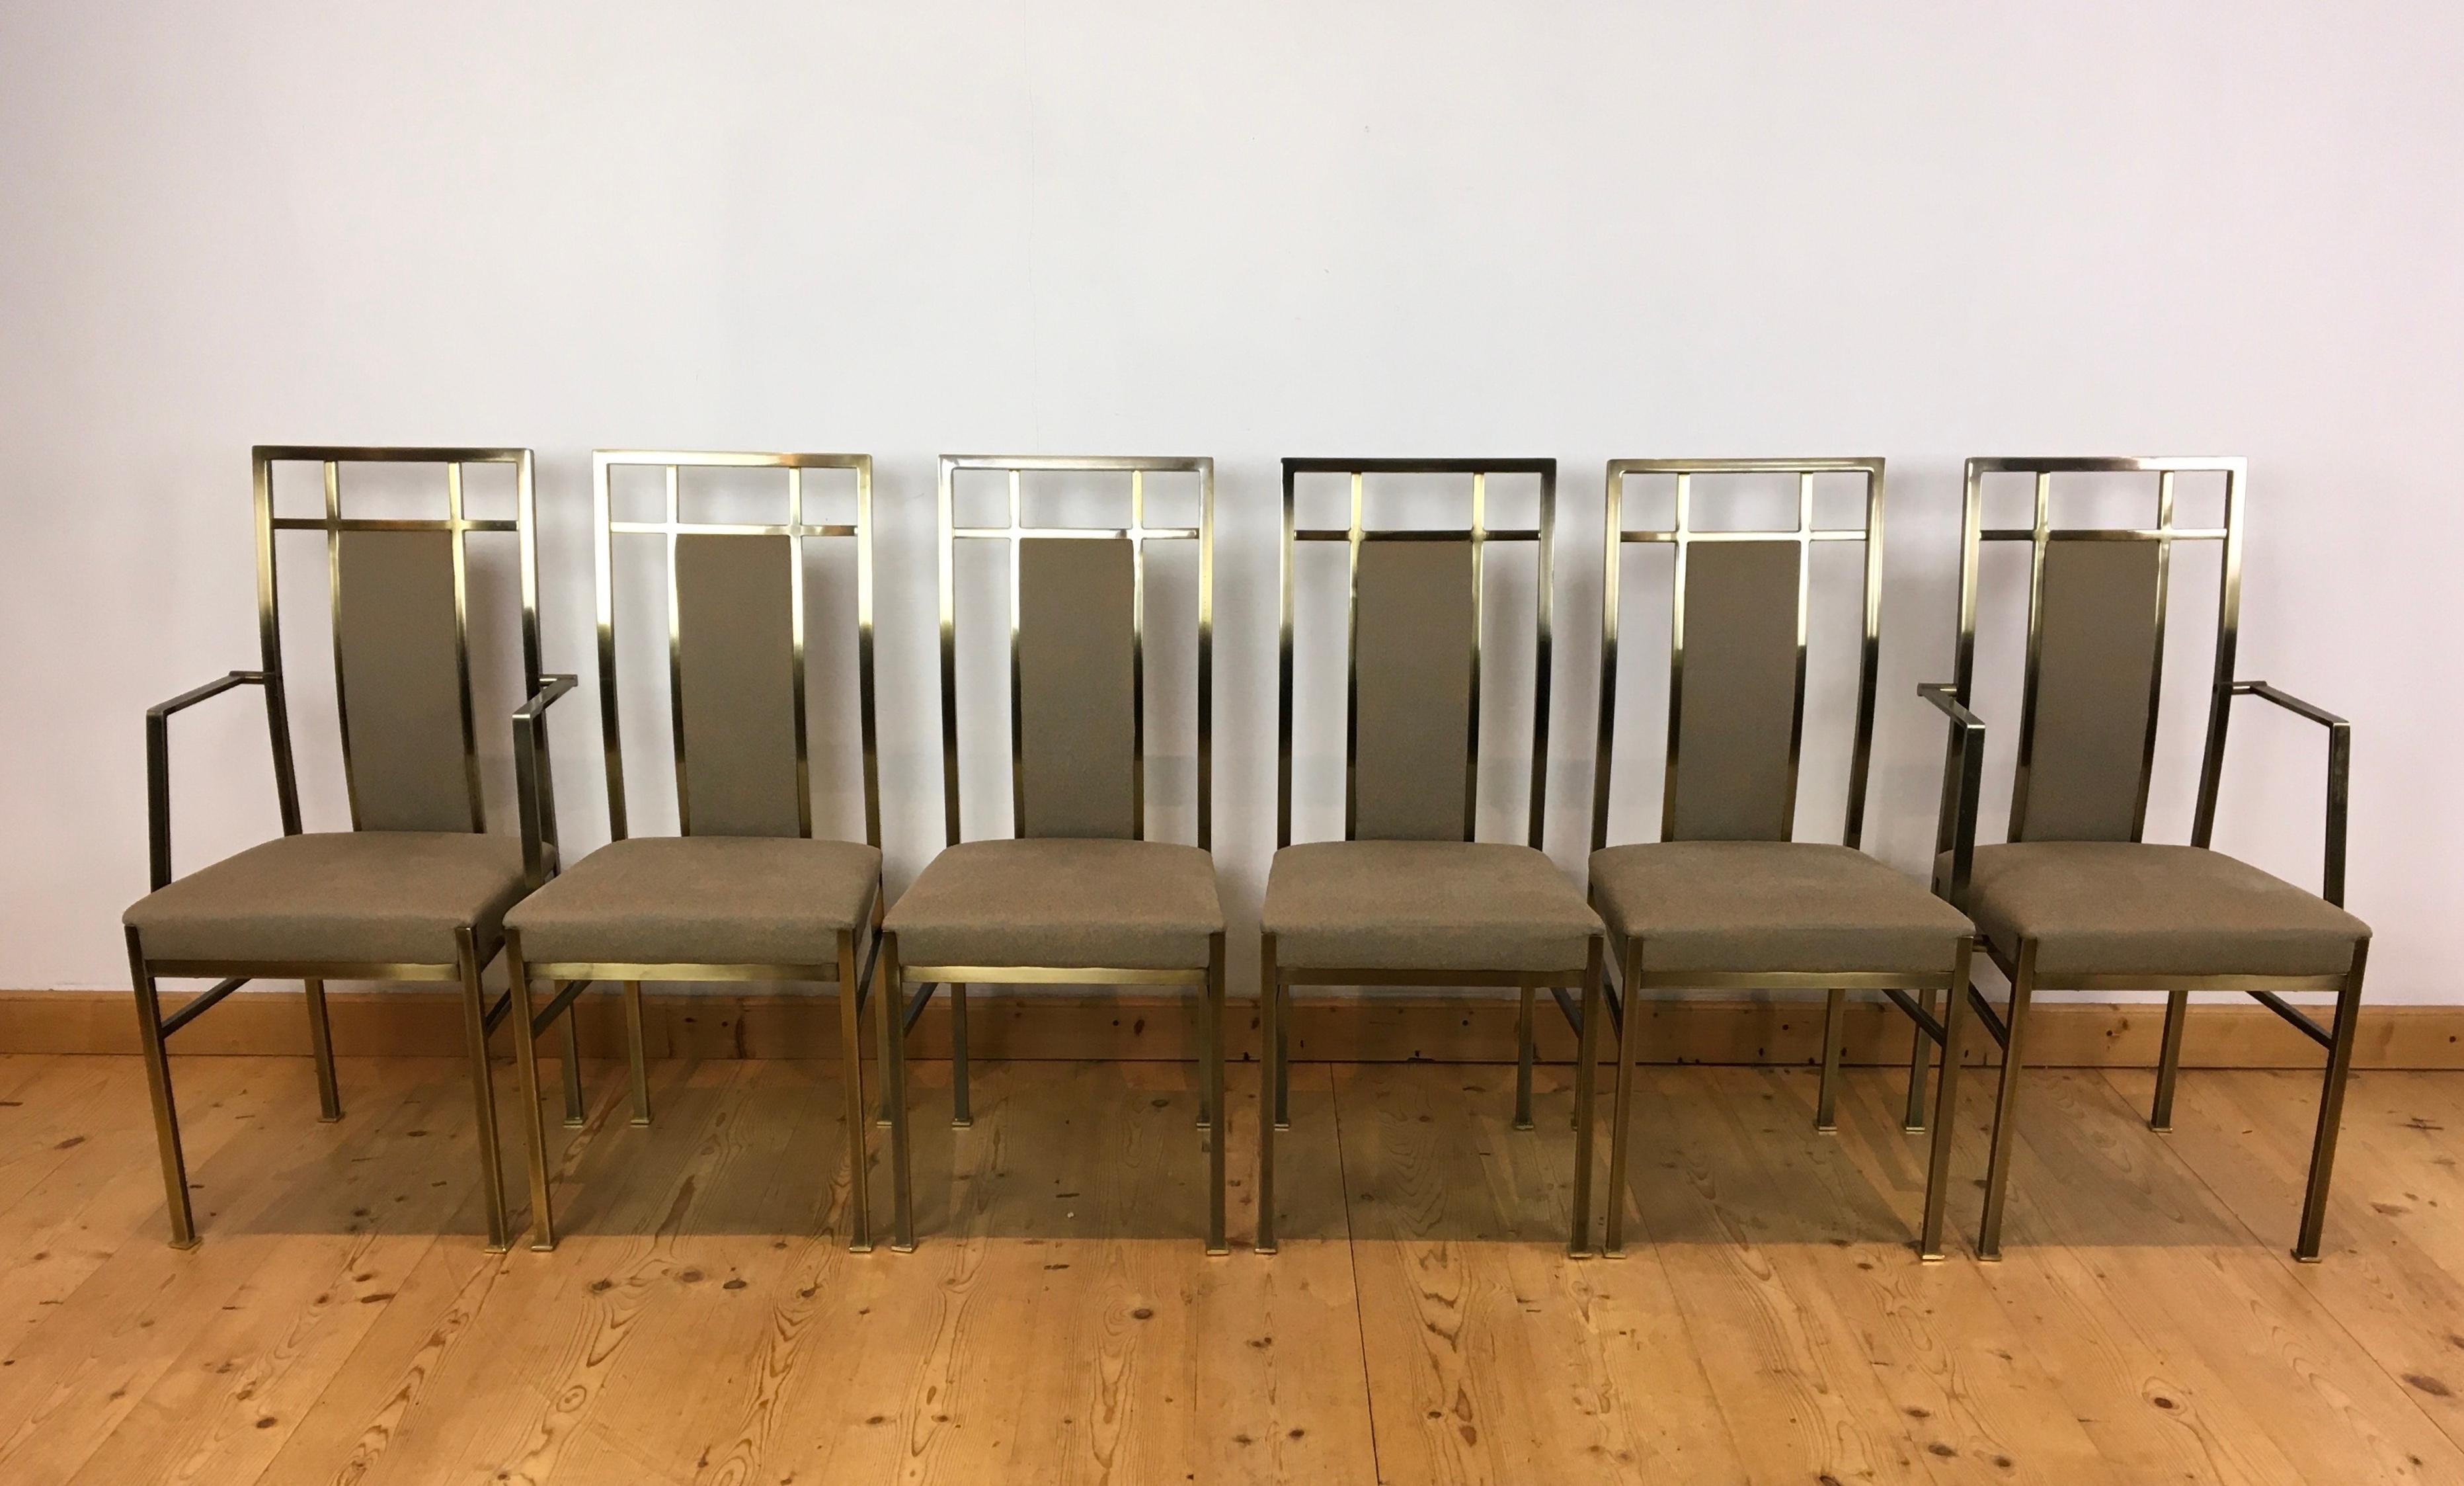 Set of 6 Belgo Chrome dining room chairs. 
Plated metal chairs covered with fabric on the seats and back support ( as well on the front and back ) The set consists of 4 chairs and 2 armchairs or head seats. Fabric has the color speckled brown -